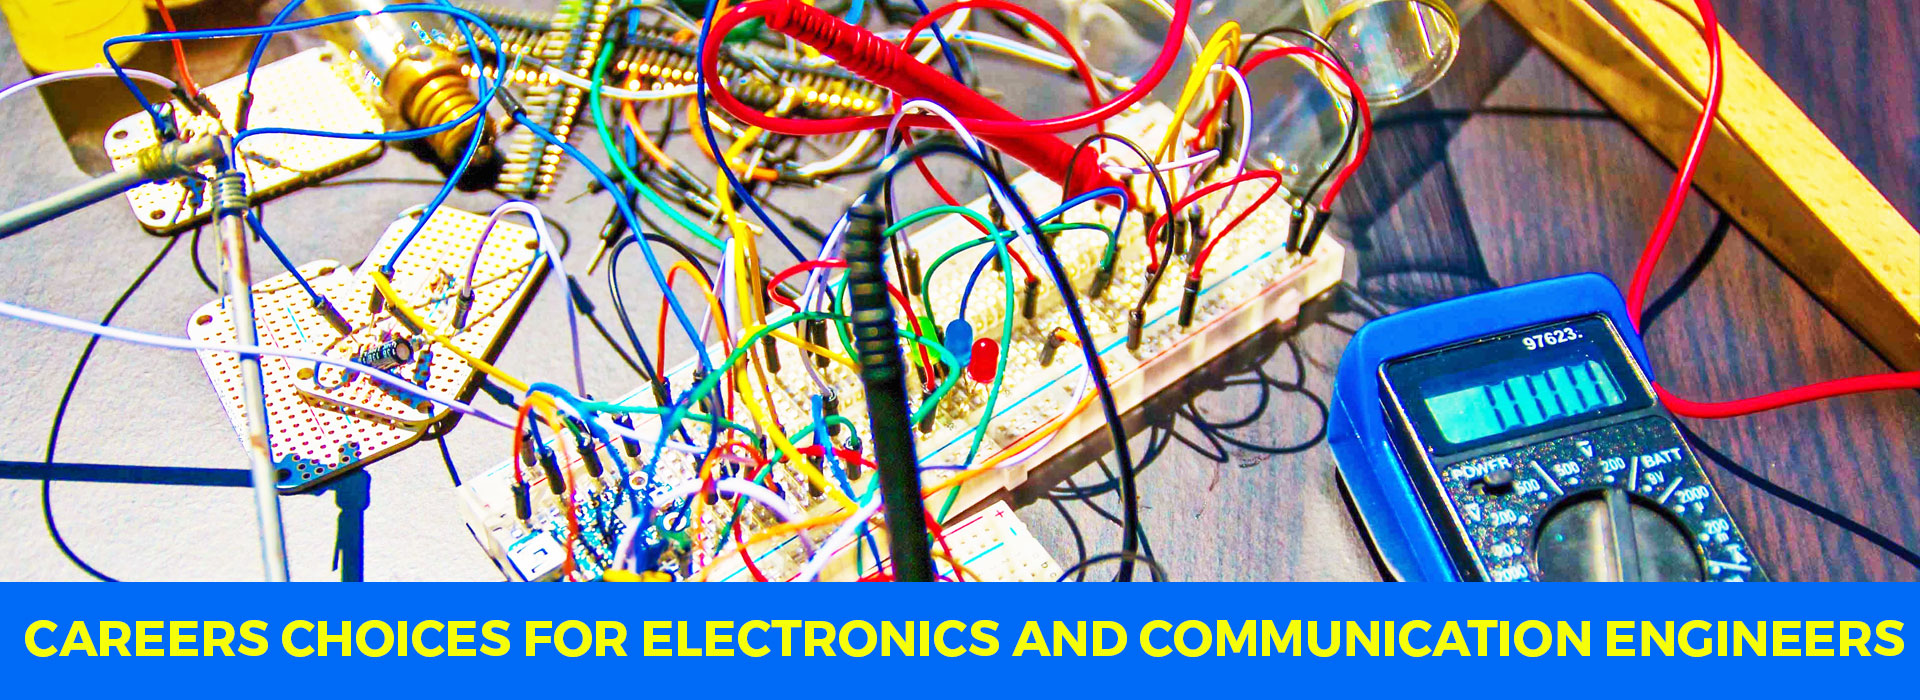 Careers Choices for Electronics and Communication Engineers 